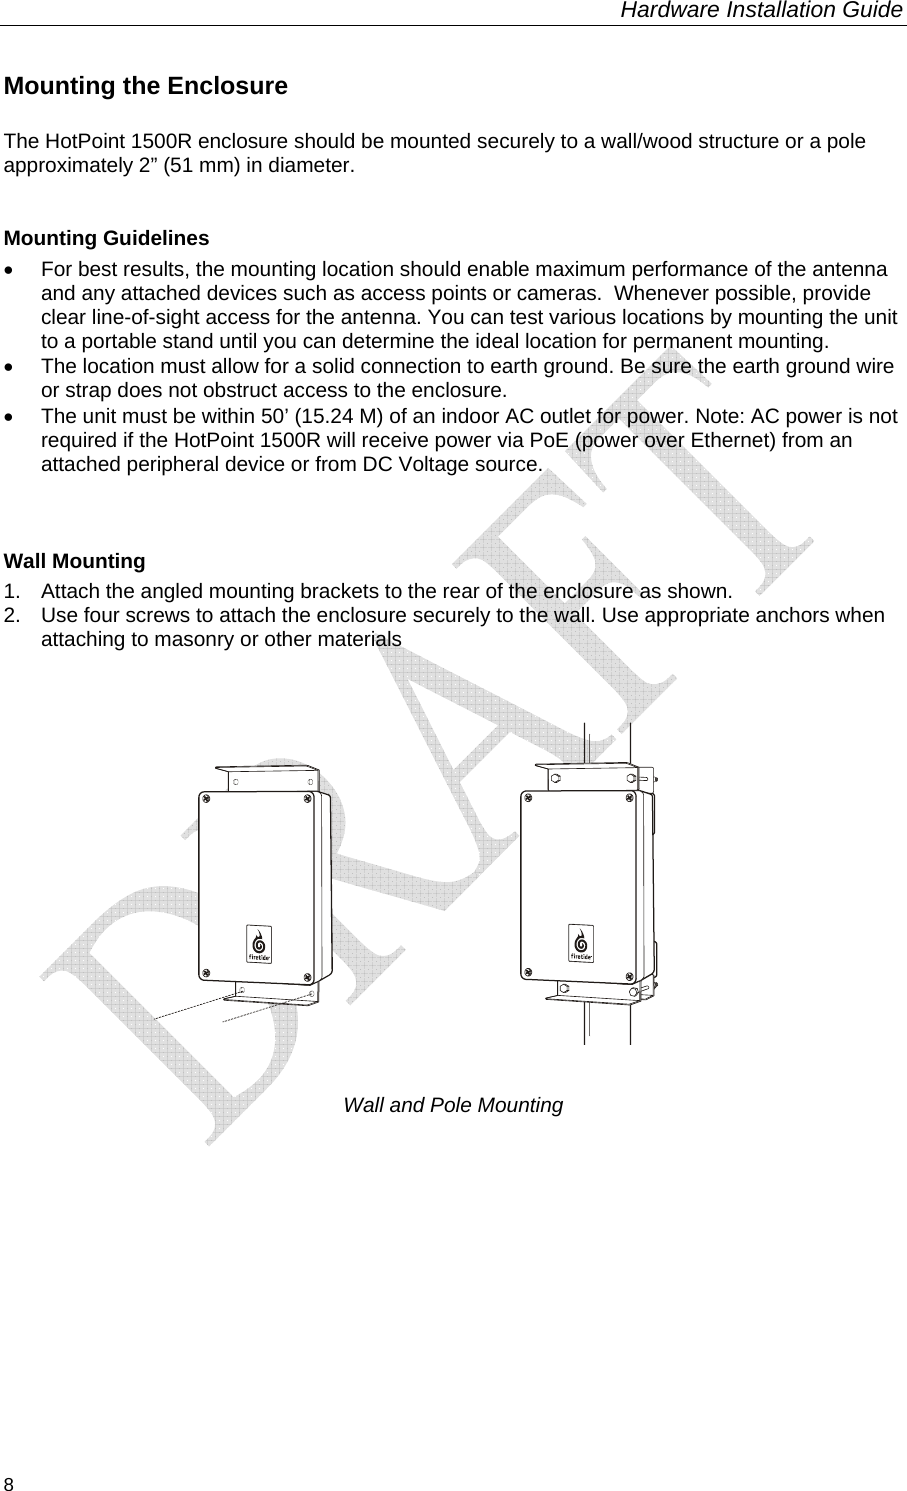 Hardware Installation Guide  8 Mounting the Enclosure The HotPoint 1500R enclosure should be mounted securely to a wall/wood structure or a pole approximately 2” (51 mm) in diameter.   Mounting Guidelines •  For best results, the mounting location should enable maximum performance of the antenna and any attached devices such as access points or cameras.  Whenever possible, provide clear line-of-sight access for the antenna. You can test various locations by mounting the unit to a portable stand until you can determine the ideal location for permanent mounting. •  The location must allow for a solid connection to earth ground. Be sure the earth ground wire or strap does not obstruct access to the enclosure.  •  The unit must be within 50’ (15.24 M) of an indoor AC outlet for power. Note: AC power is not required if the HotPoint 1500R will receive power via PoE (power over Ethernet) from an attached peripheral device or from DC Voltage source.                               Wall Mounting 1.  Attach the angled mounting brackets to the rear of the enclosure as shown. 2.  Use four screws to attach the enclosure securely to the wall. Use appropriate anchors when attaching to masonry or other materials       Wall and Pole Mounting      